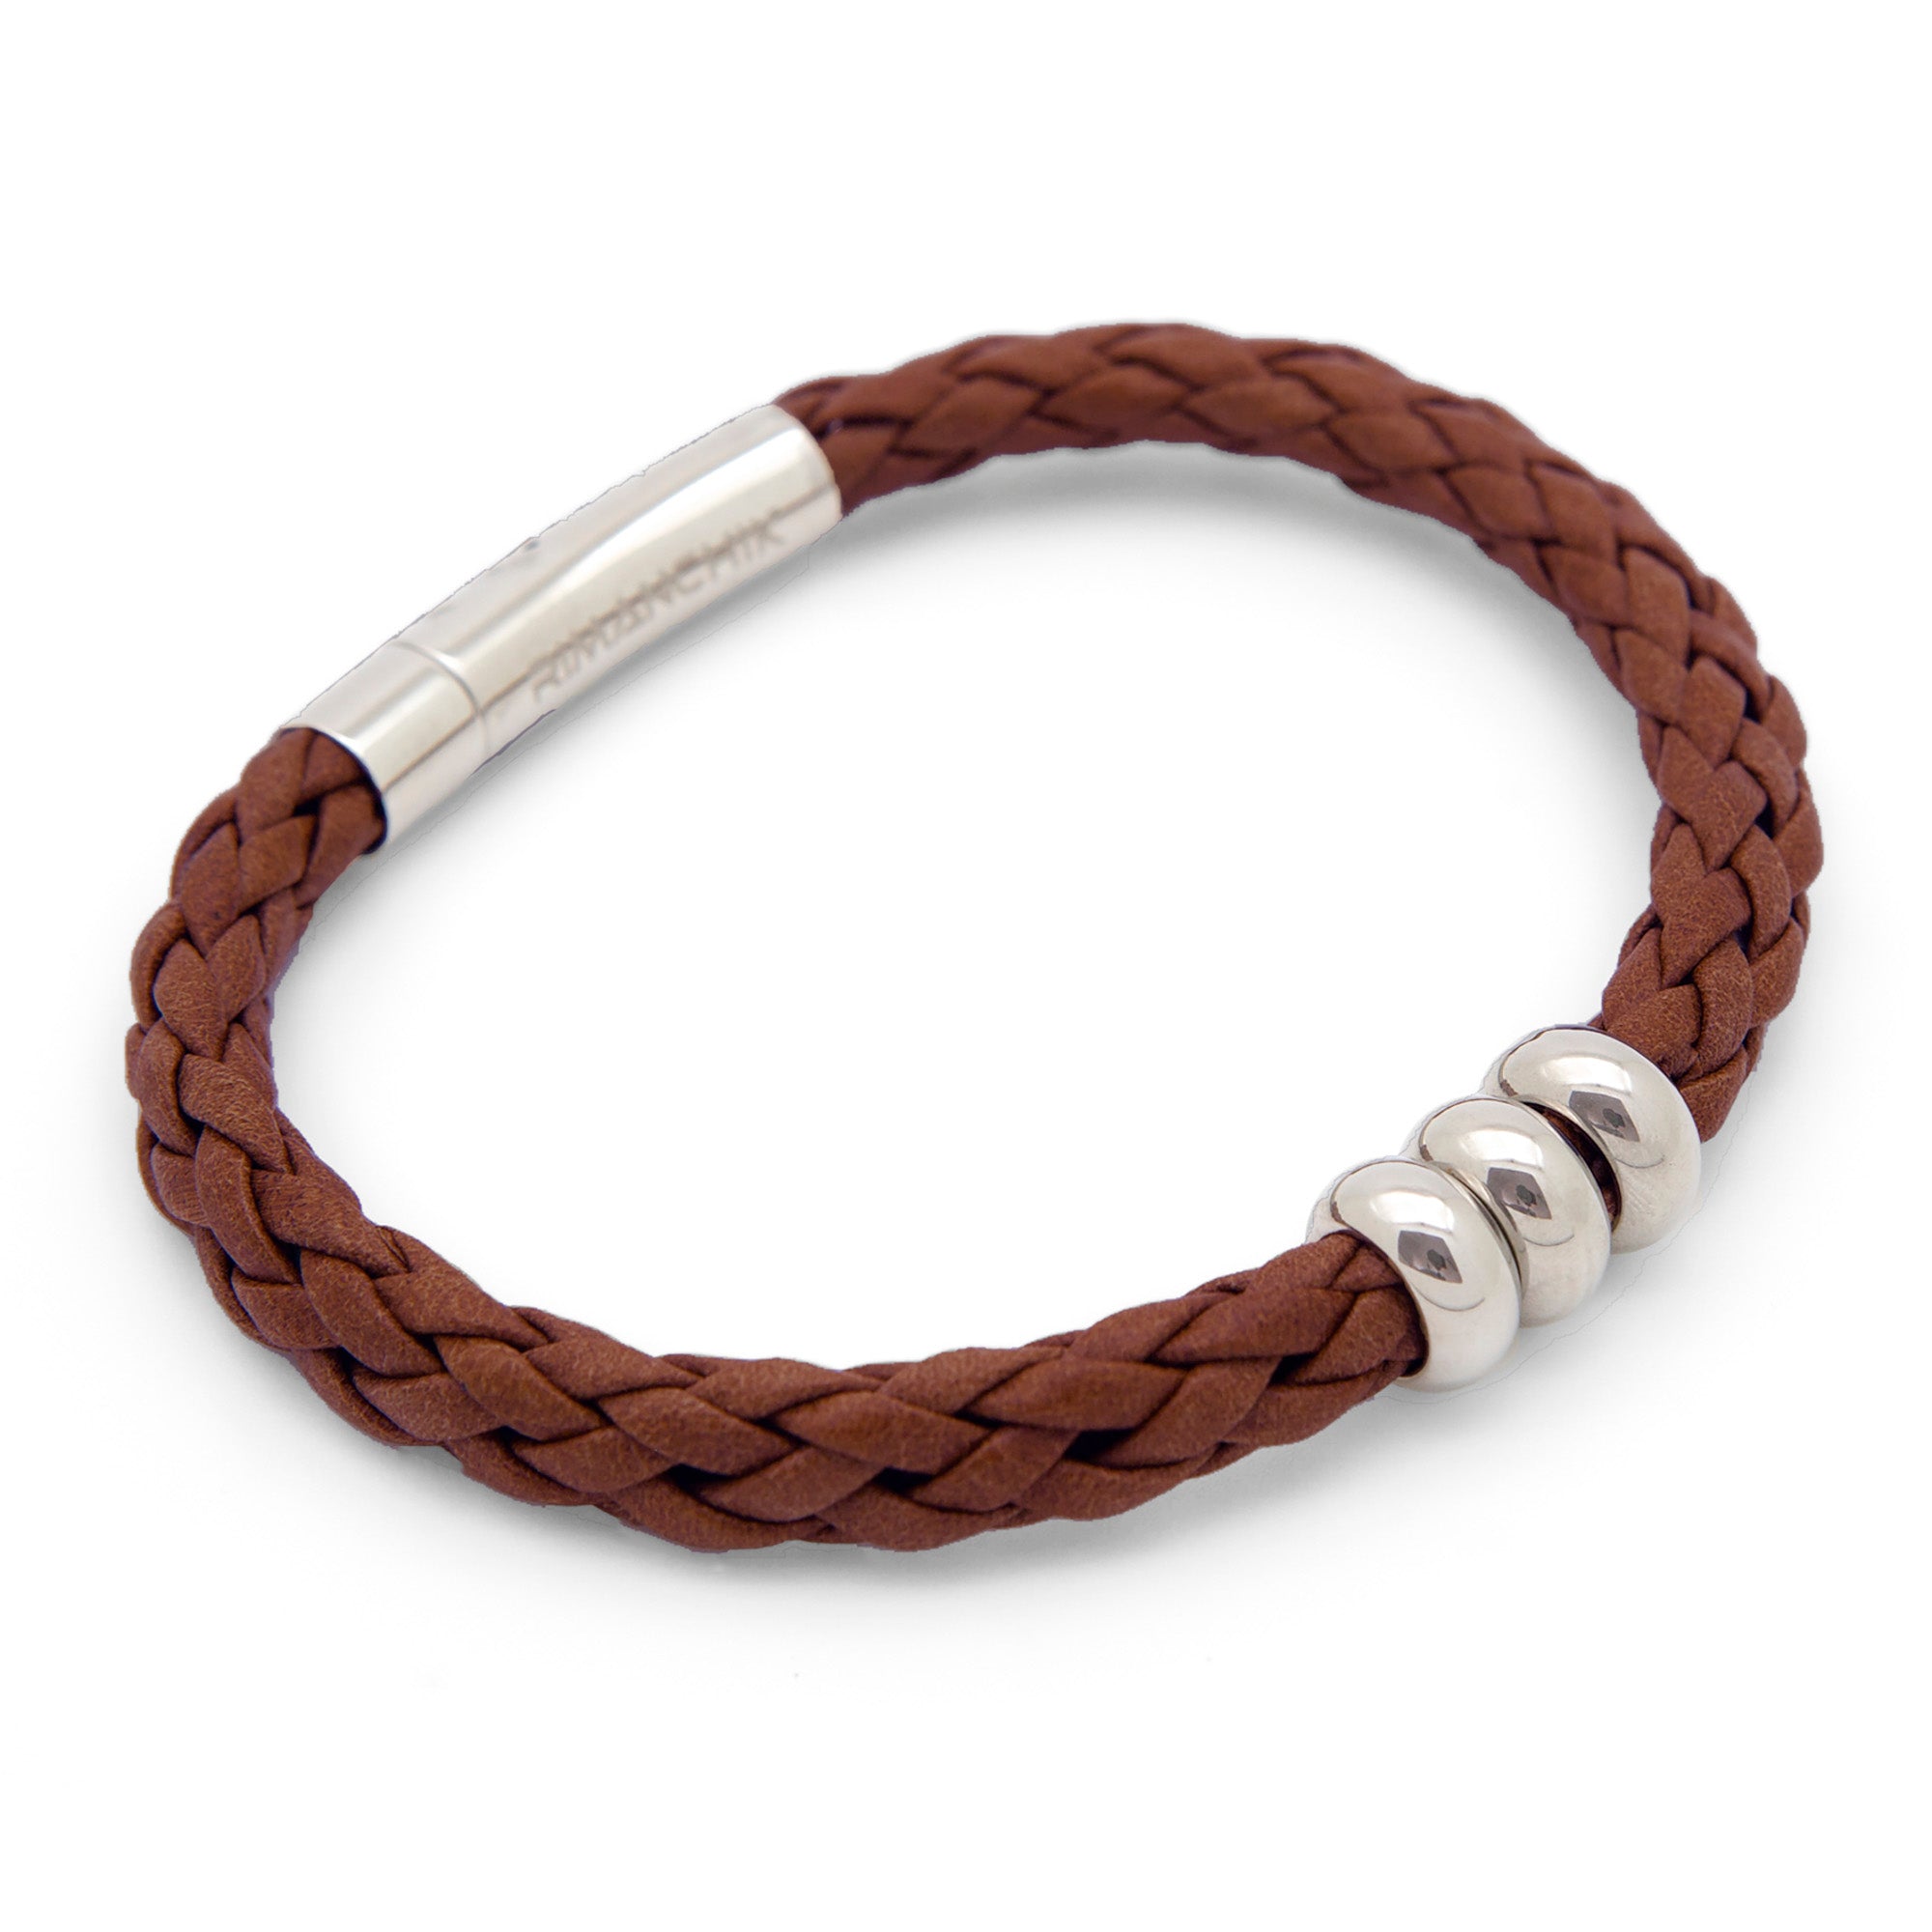 Brown braided leather bracelet | Brown leather cuff | Made in Canada Medium: 19cm / 7.5”